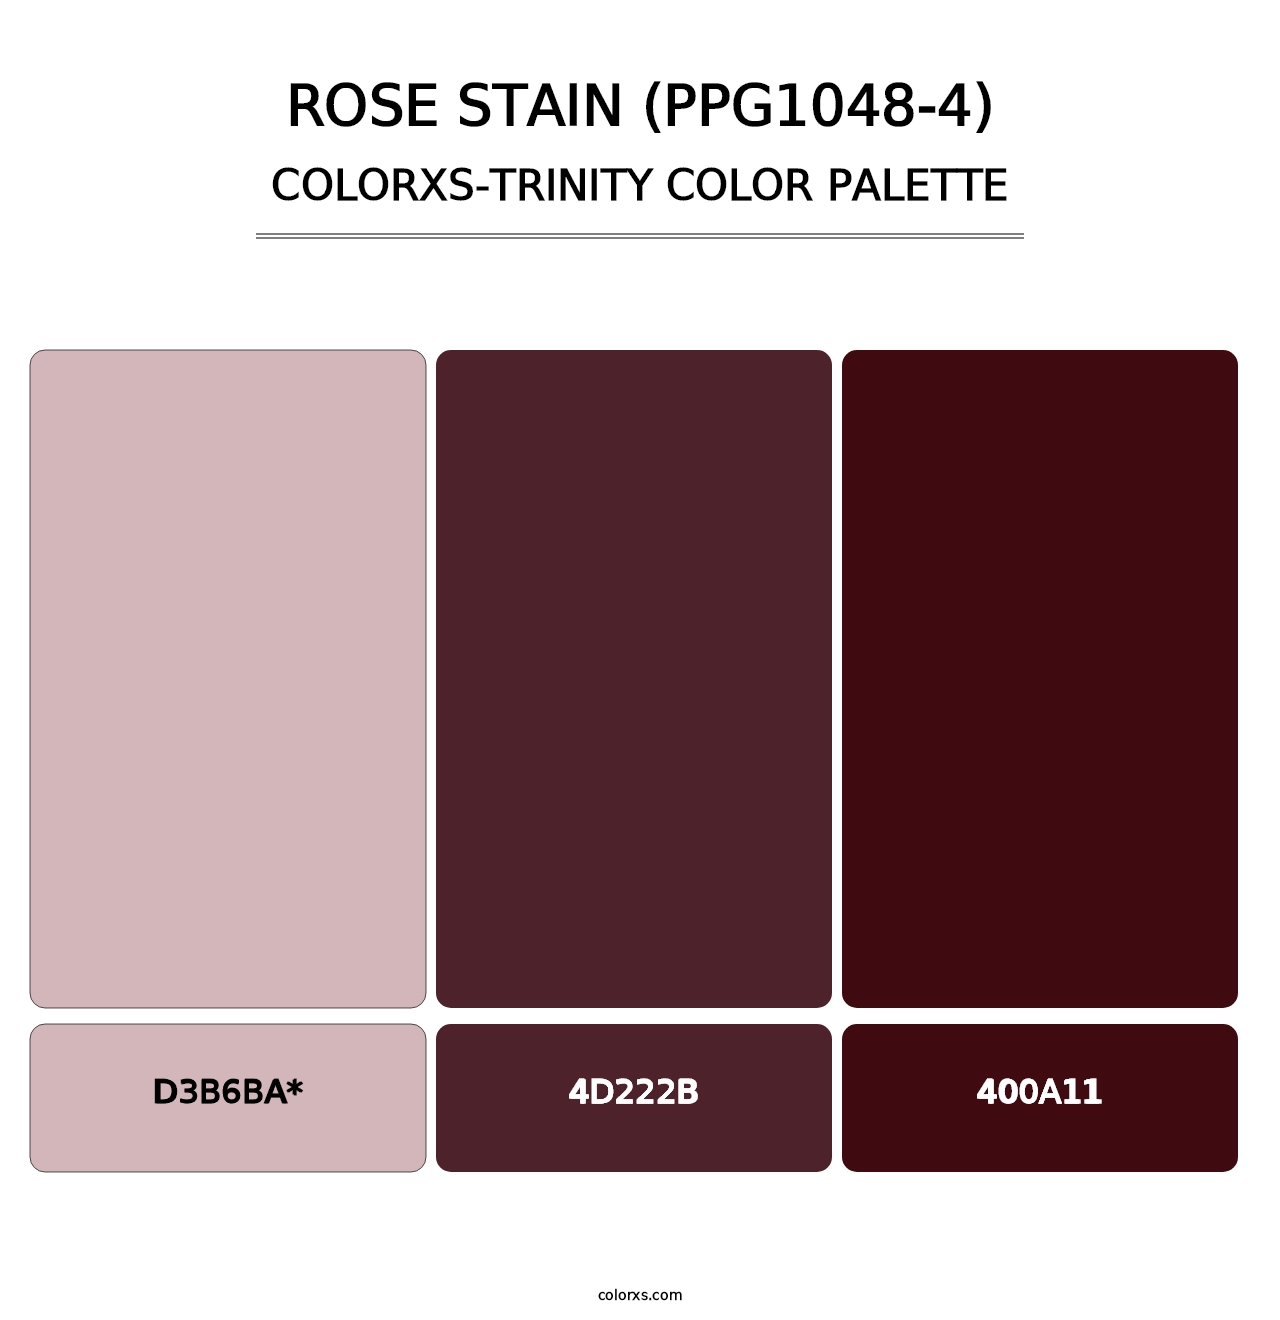 Rose Stain (PPG1048-4) - Colorxs Trinity Palette